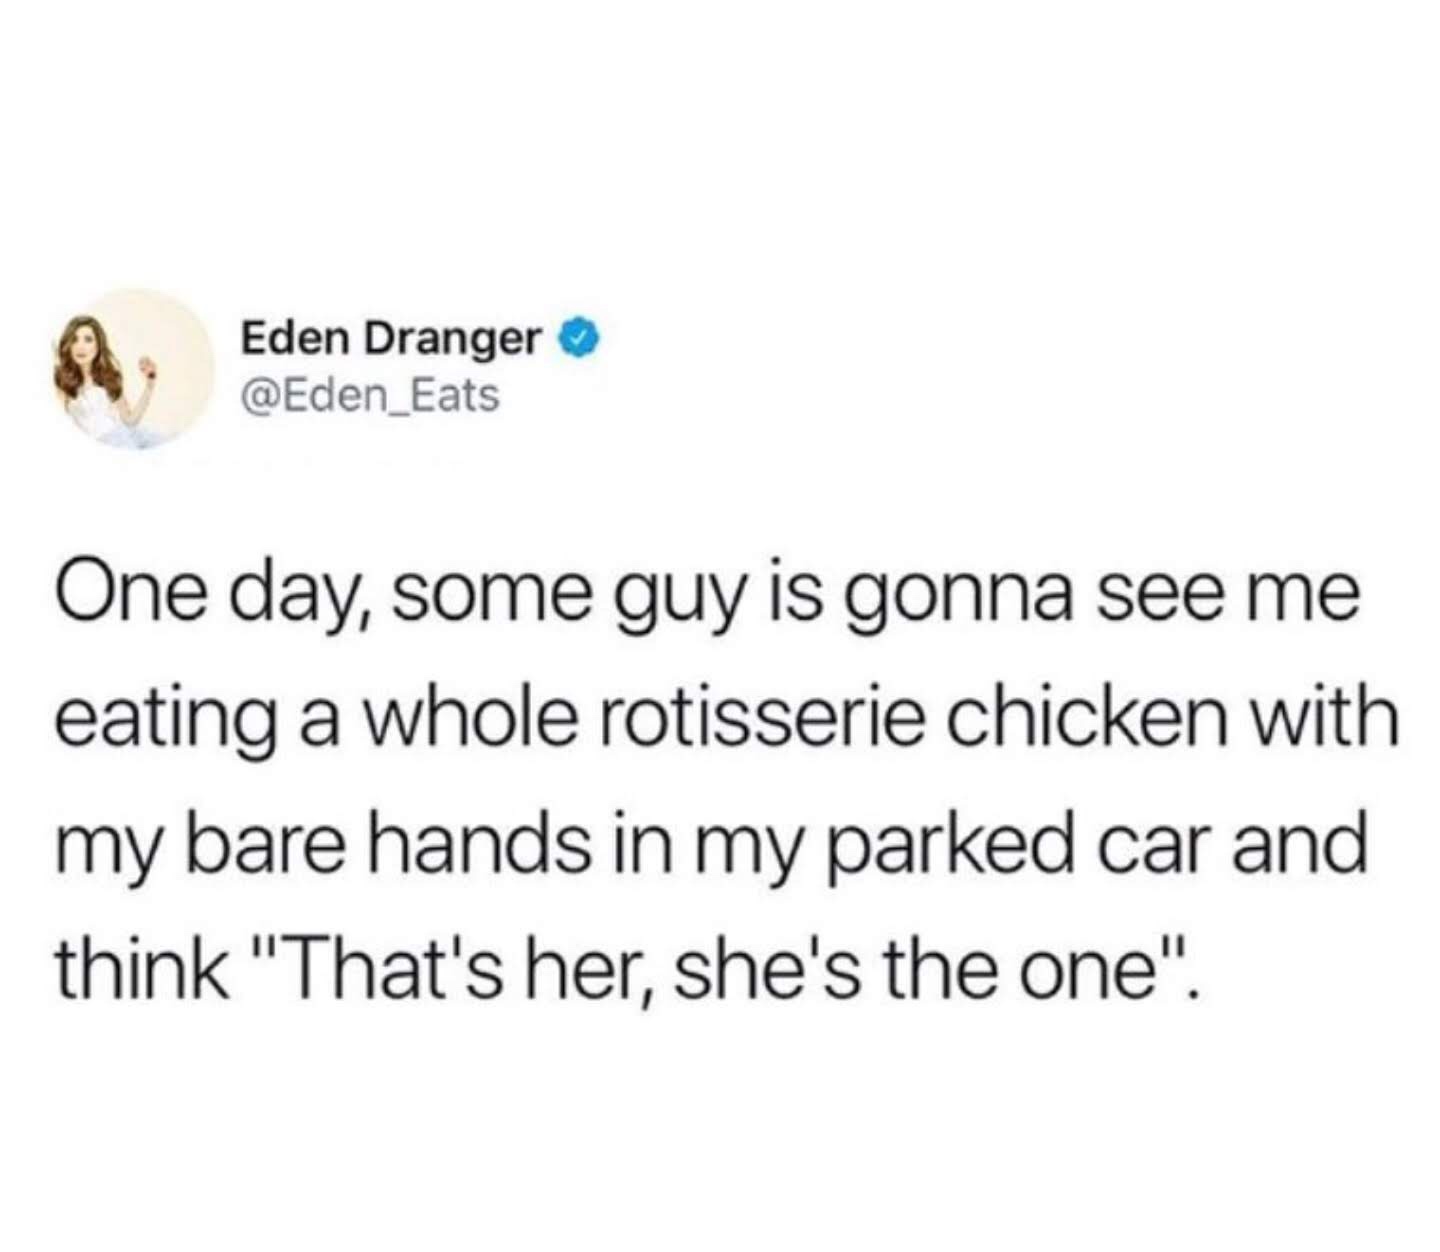 memes - document - Eden Dranger One day, some guy is gonna see me eating a whole rotisserie chicken with my bare hands in my parked car and think "That's her, she's the one".